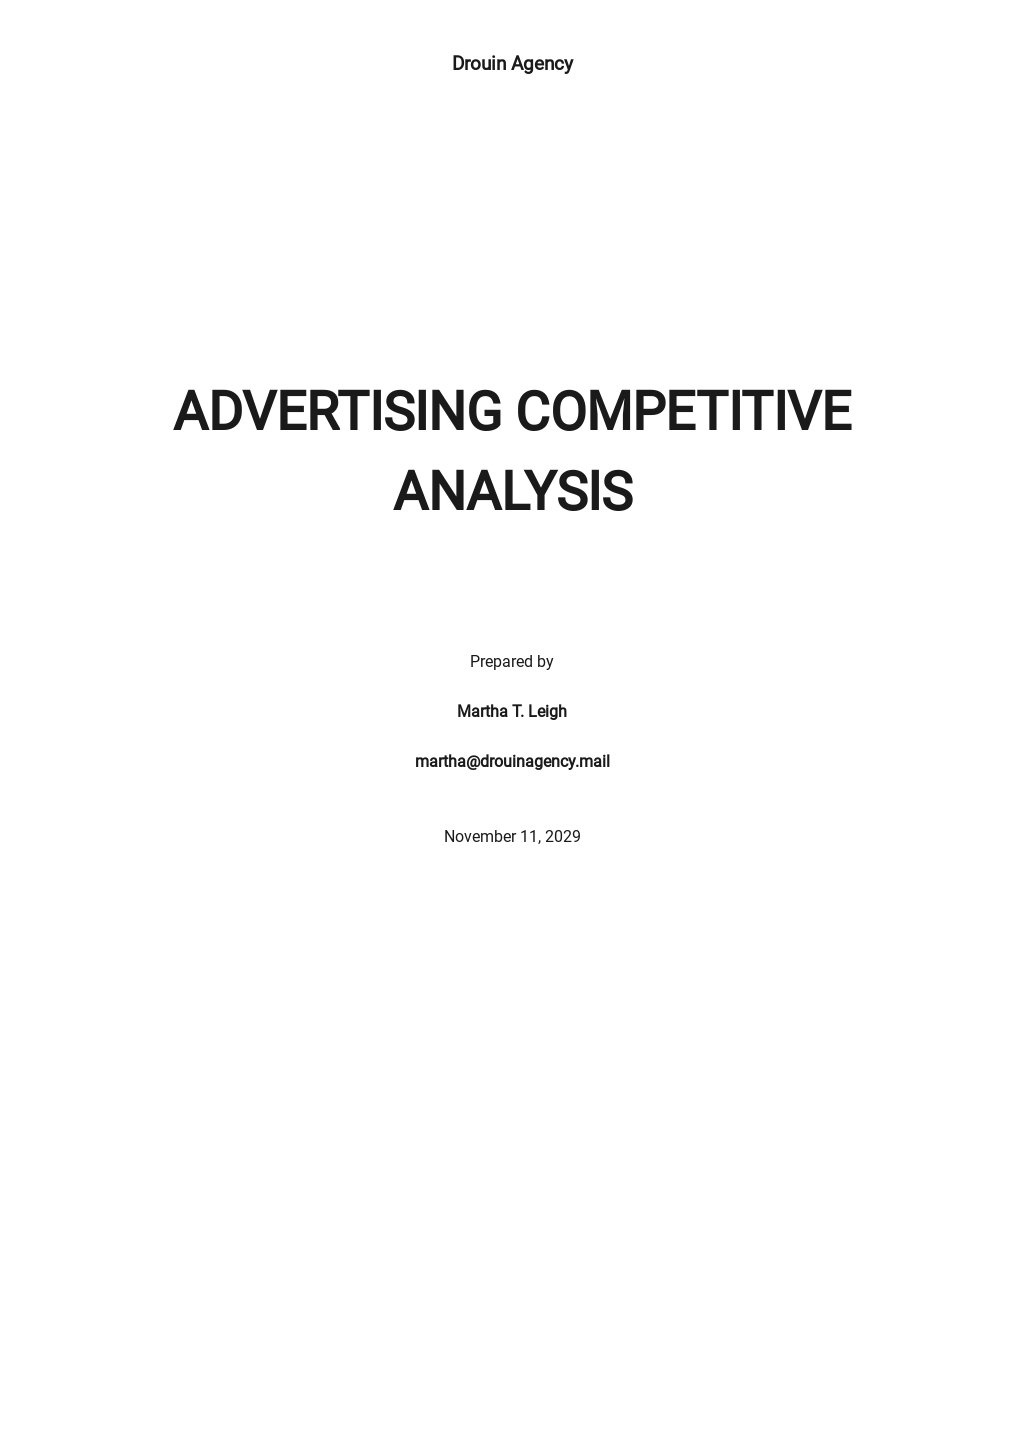 Advertising Competitive Analysis Template.jpe